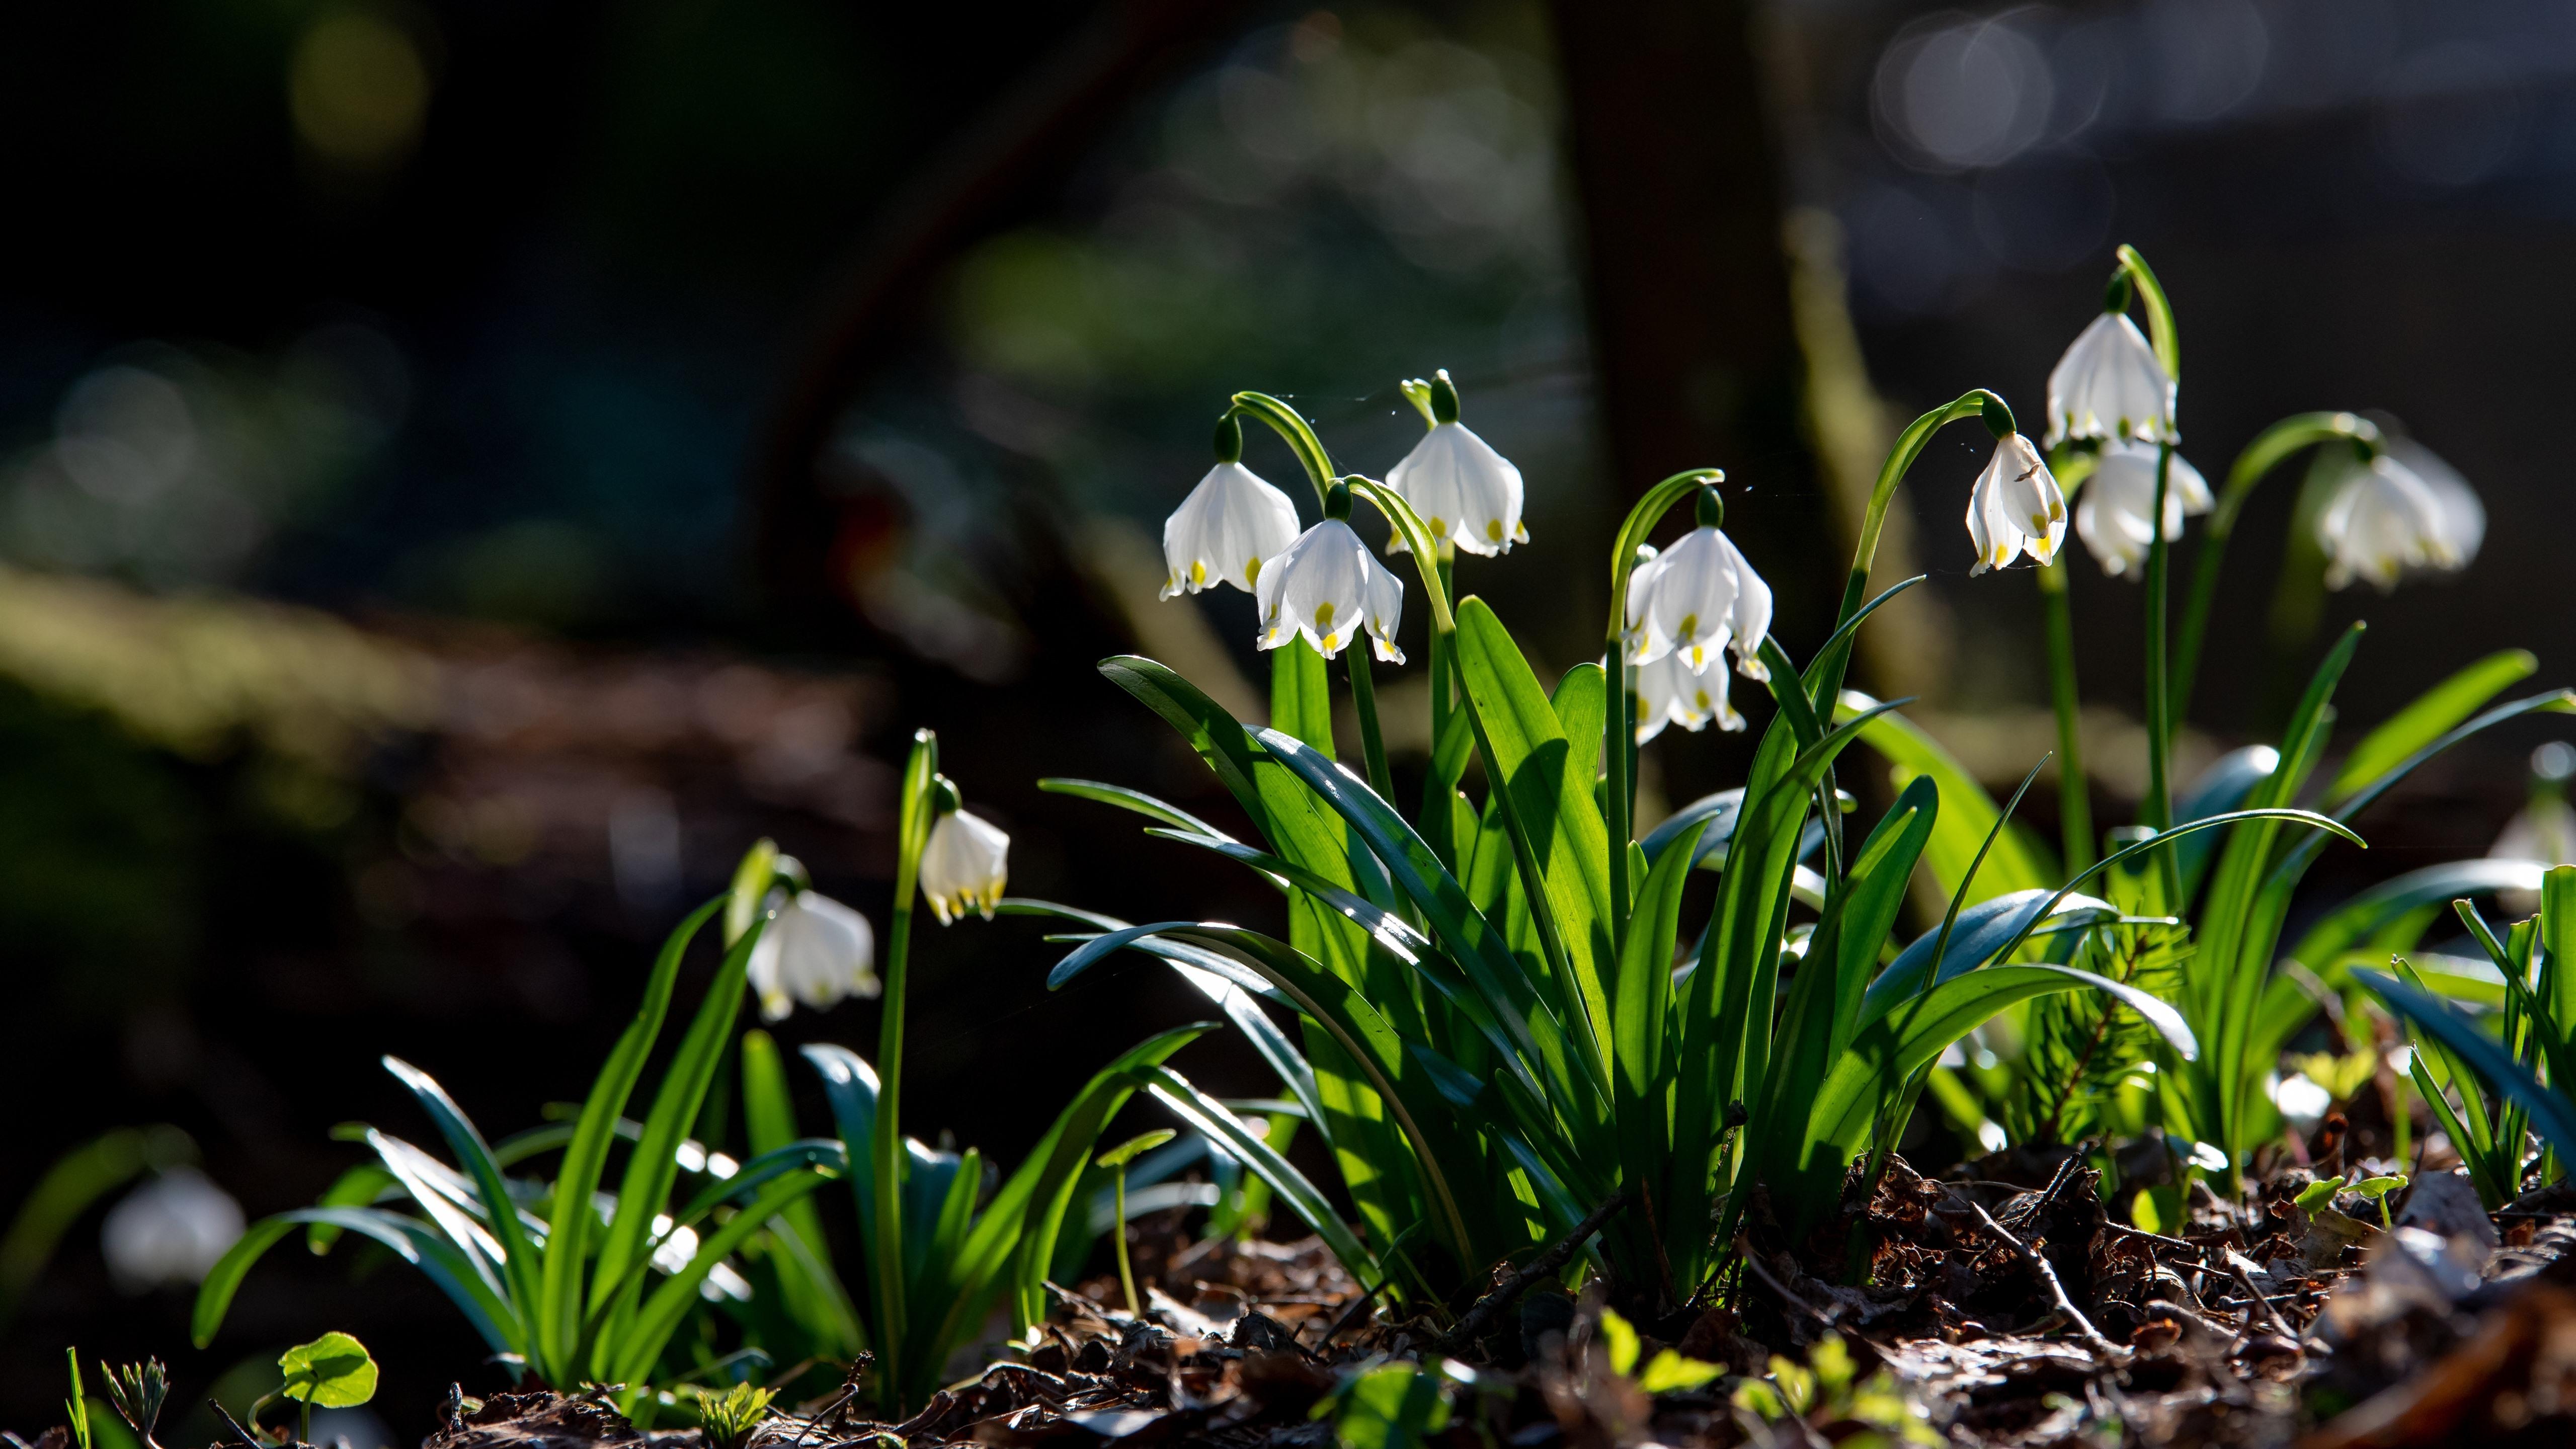 Wallpaper Snowdrops, white flowers, green foliage, spring 5120x2880 UHD 5K Picture, Image